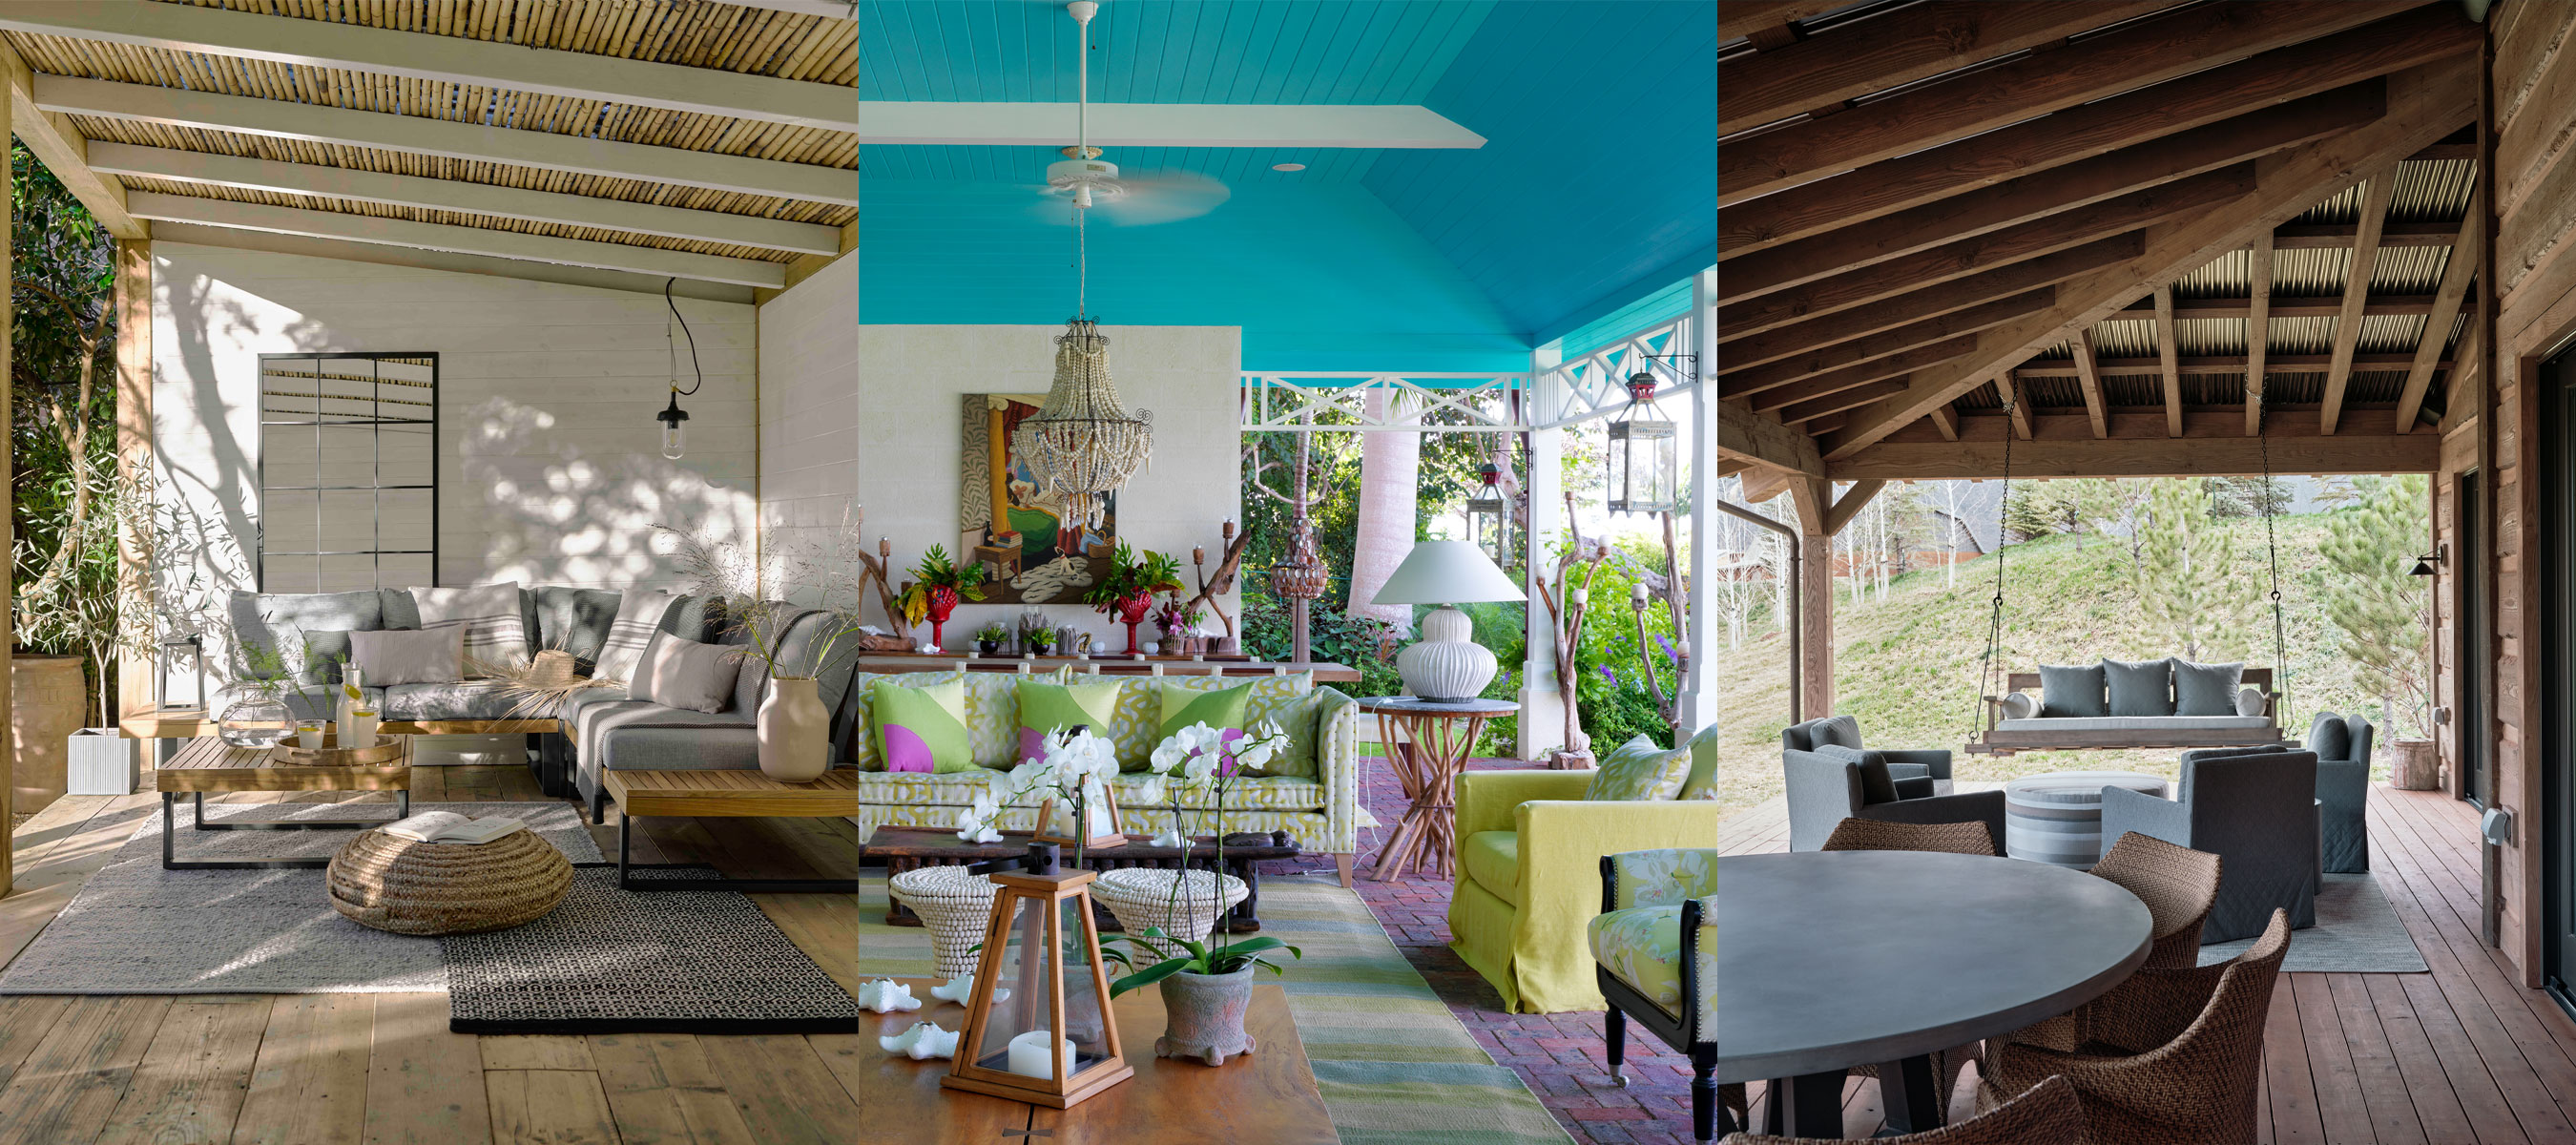 Porch Ceiling Ideas 12 Looks That Unite Beauty With Functionality